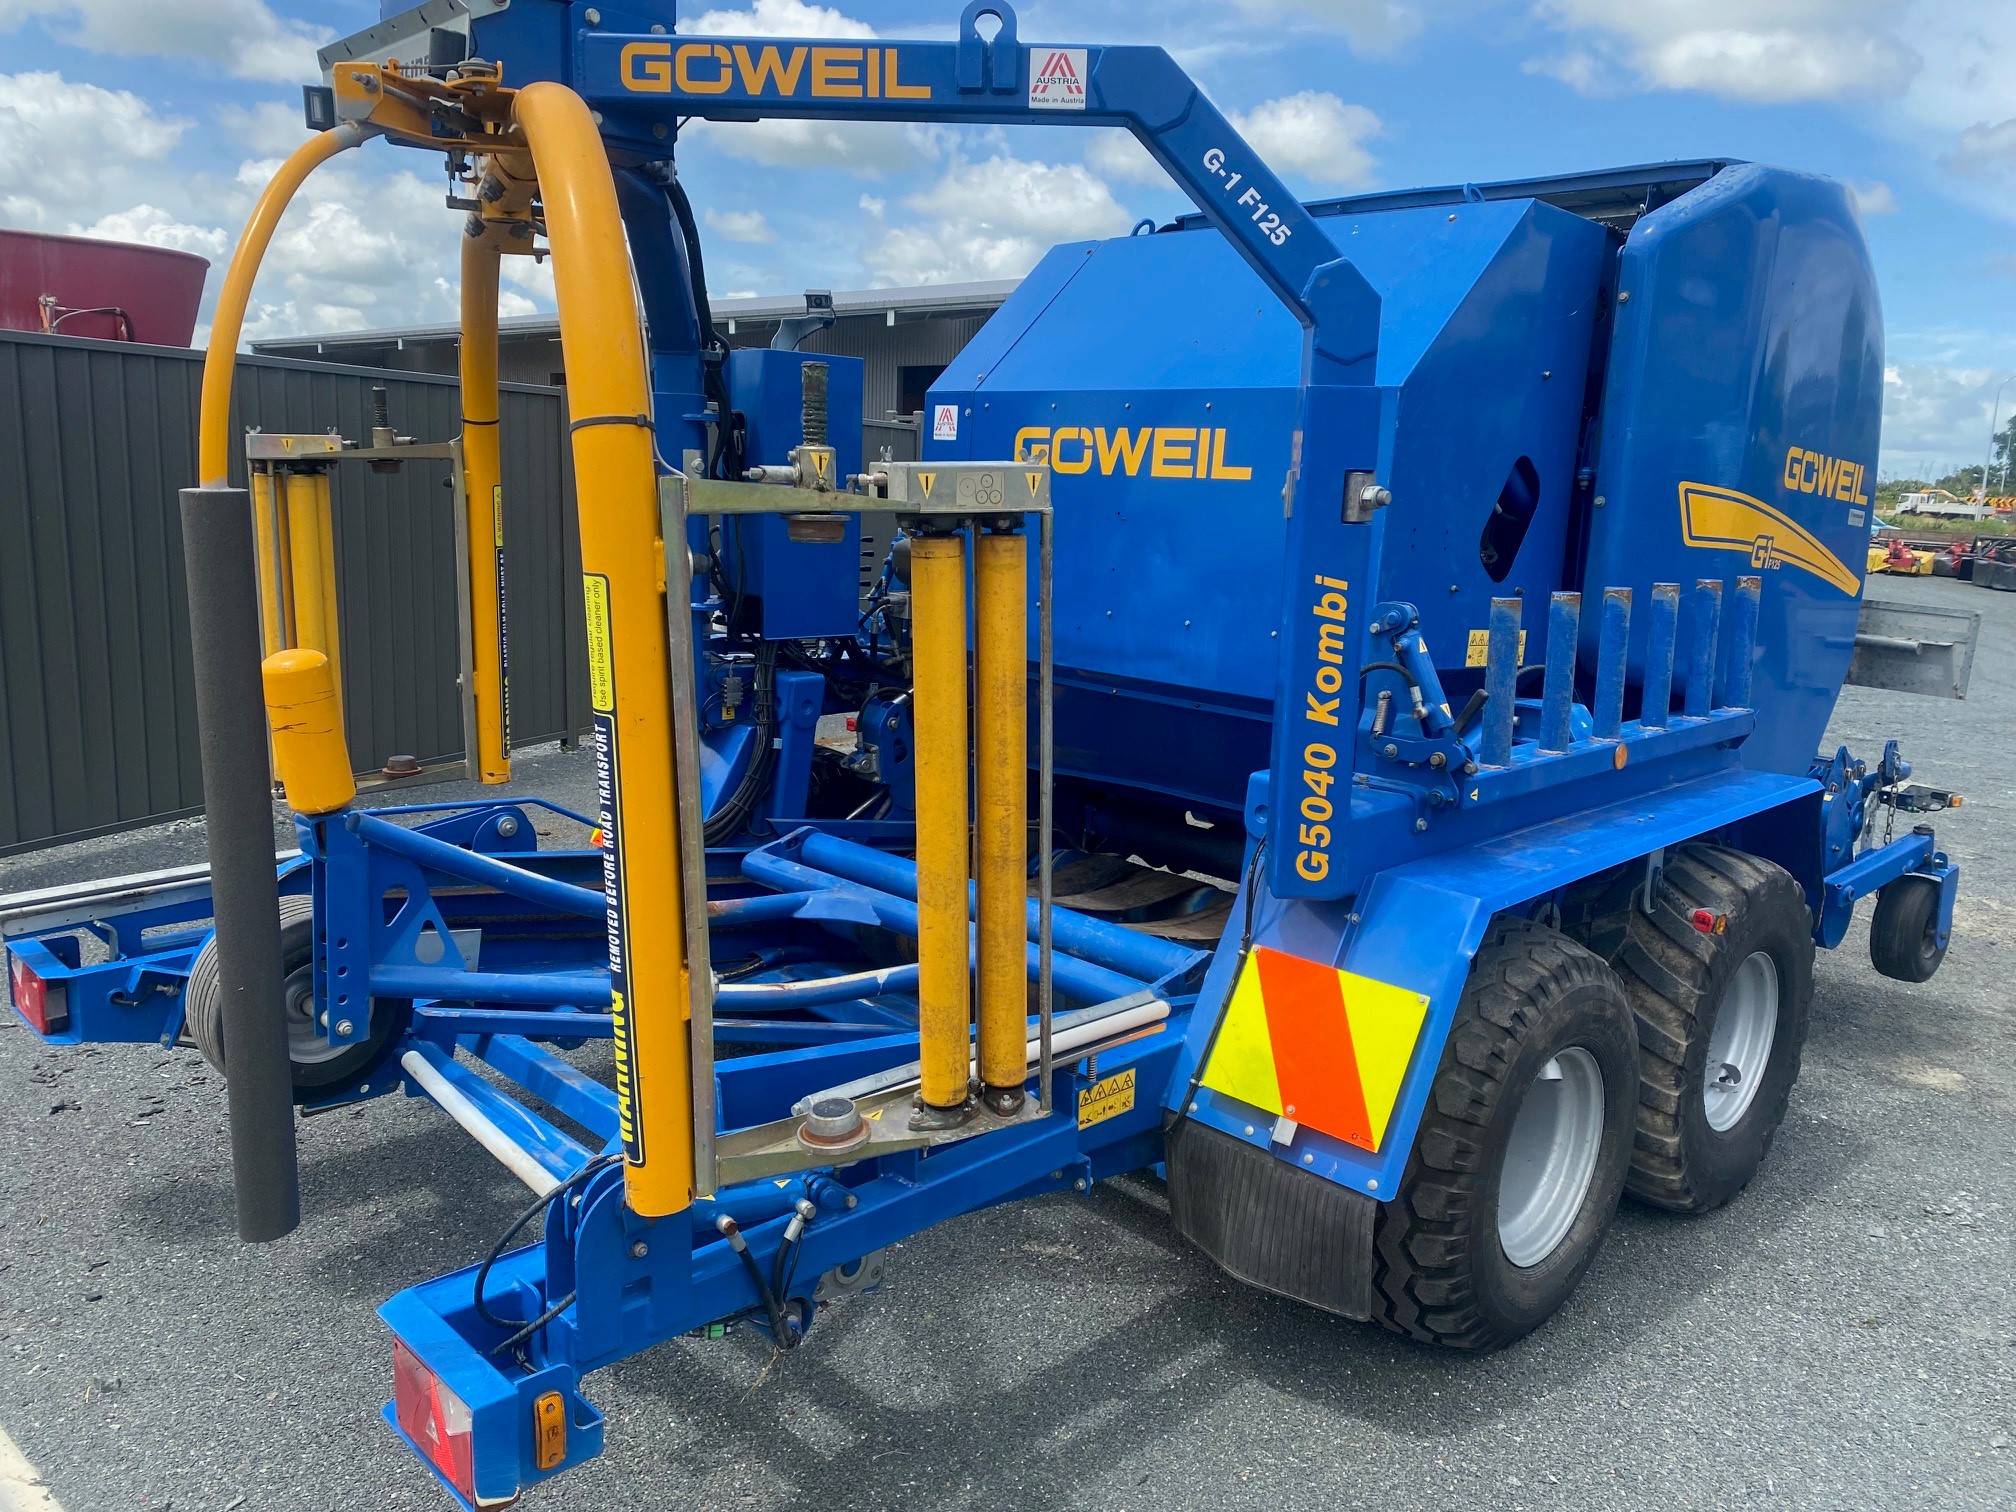 Goweil G1 F125 Pers Wikkel Combinatie - Used Balers - 2021 - 7622 AW -  Borne - Overijssel - Netherlands (the)